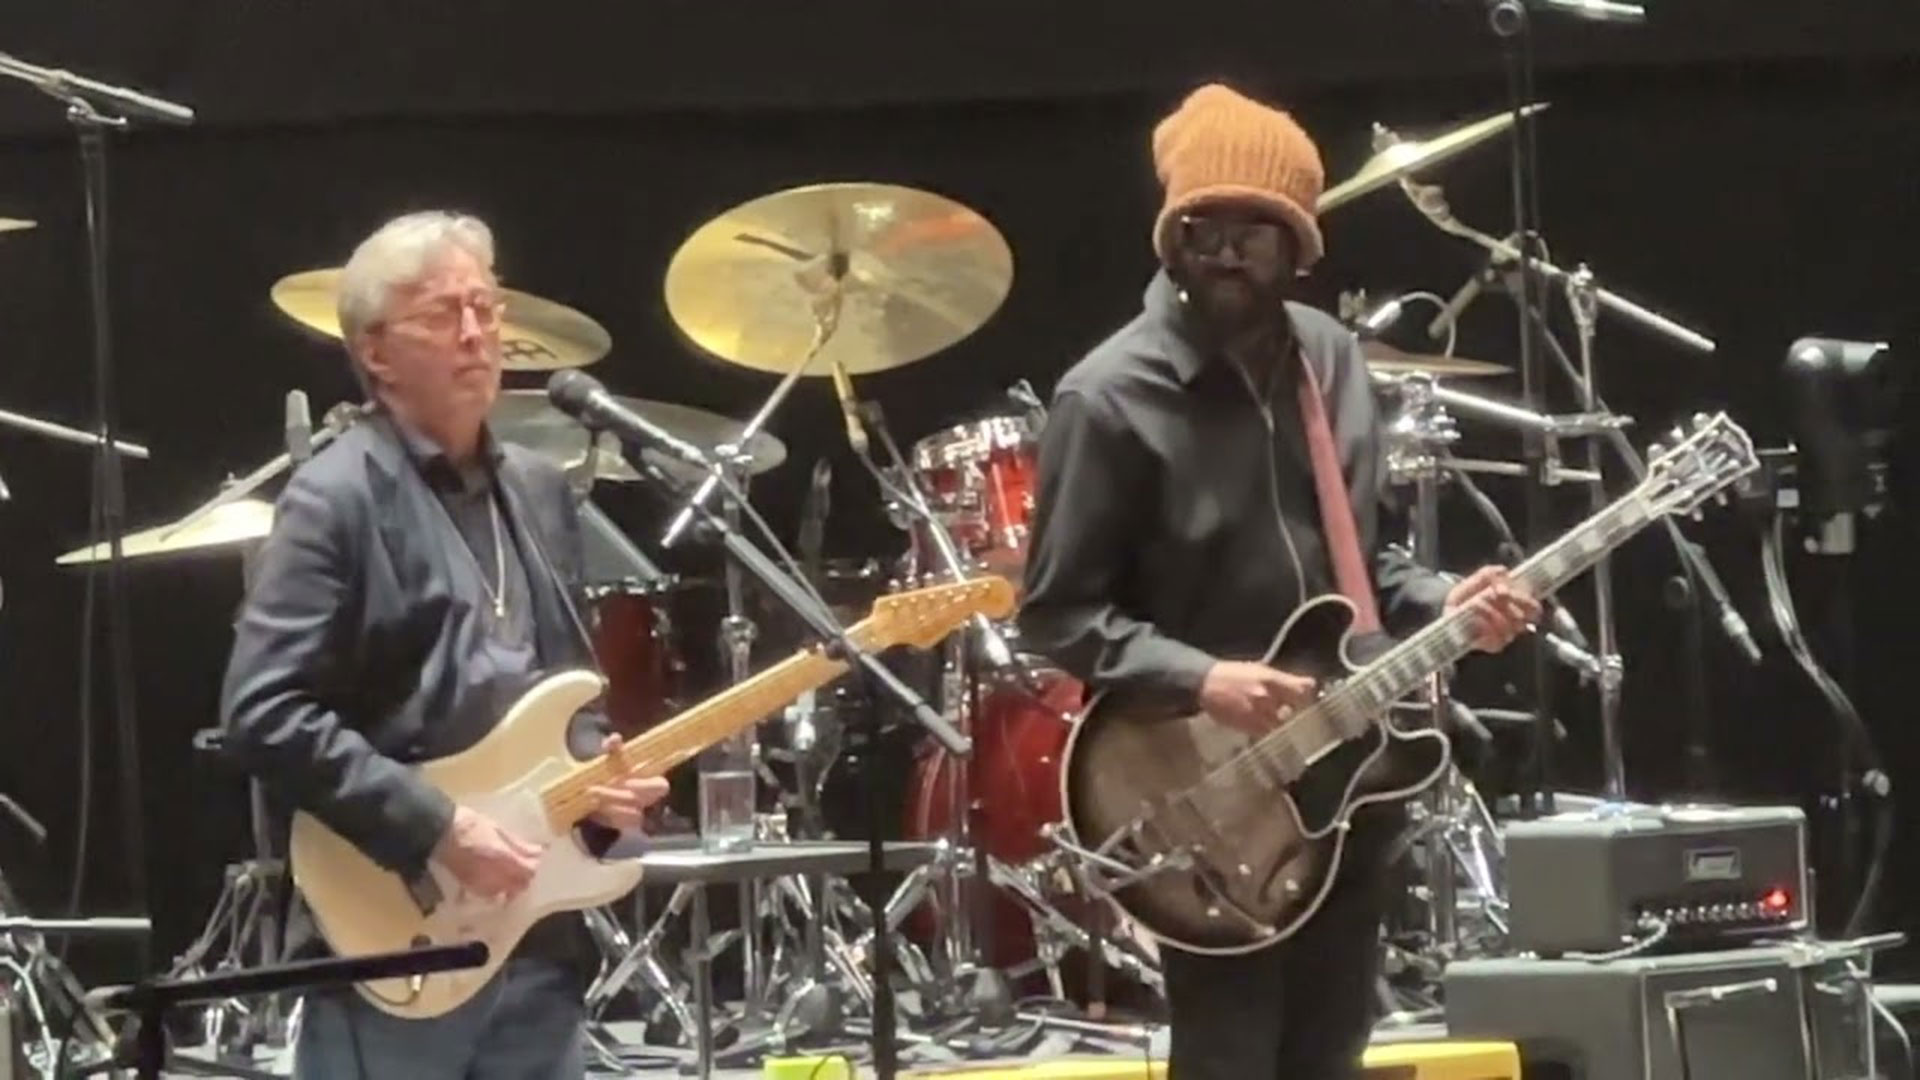 Eric Clapton and Gary Clark Jr. played Cause We’ve Ended As Lovers at the recent Jeff Beck tribute – see how they handled the show’s most daunting task